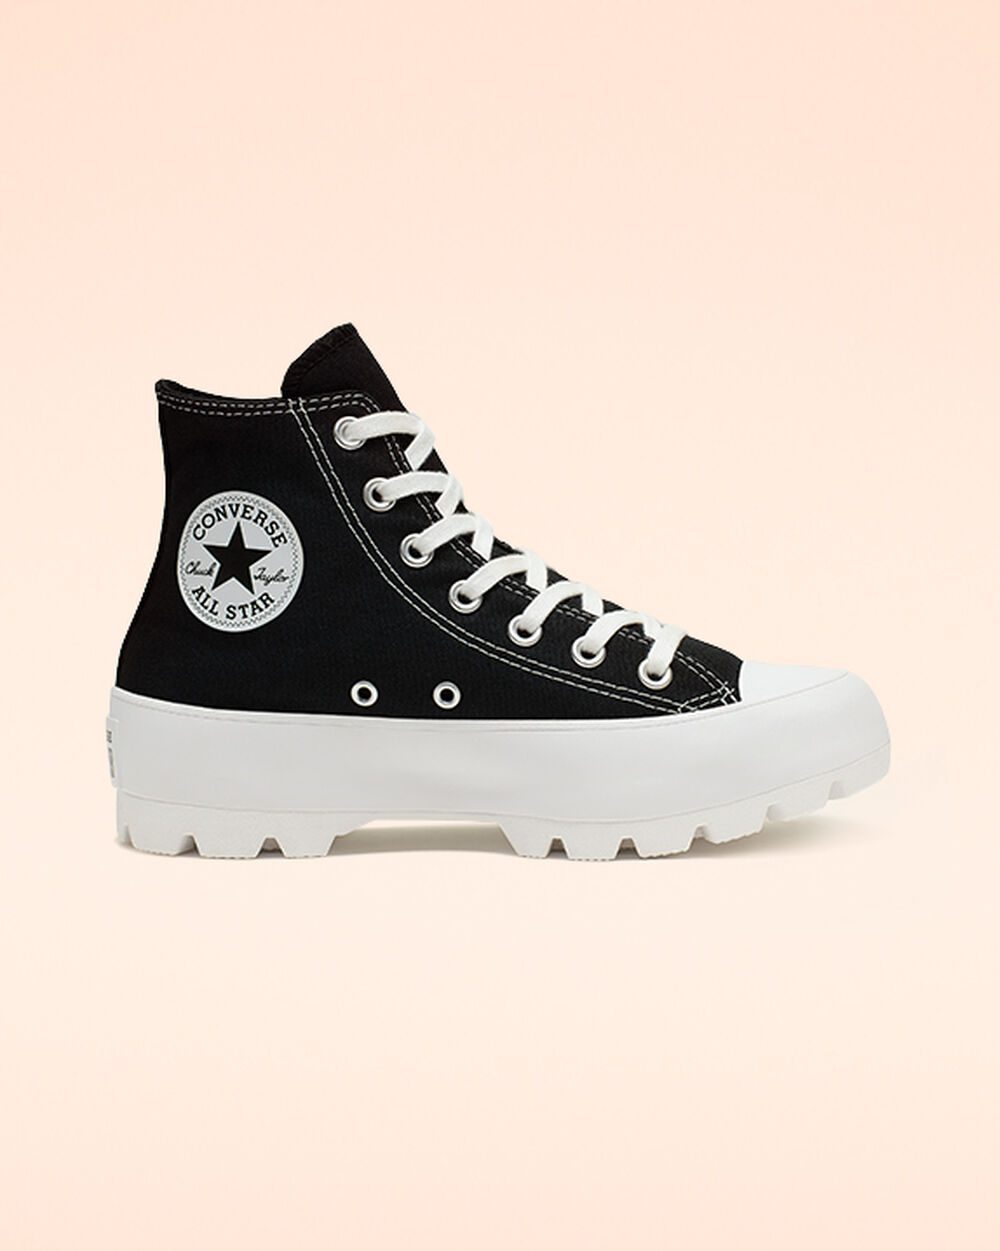 Tenis Converse Chuck Taylor All Star Lugged Mujer Negros Blancos Negros | Mexico-120646